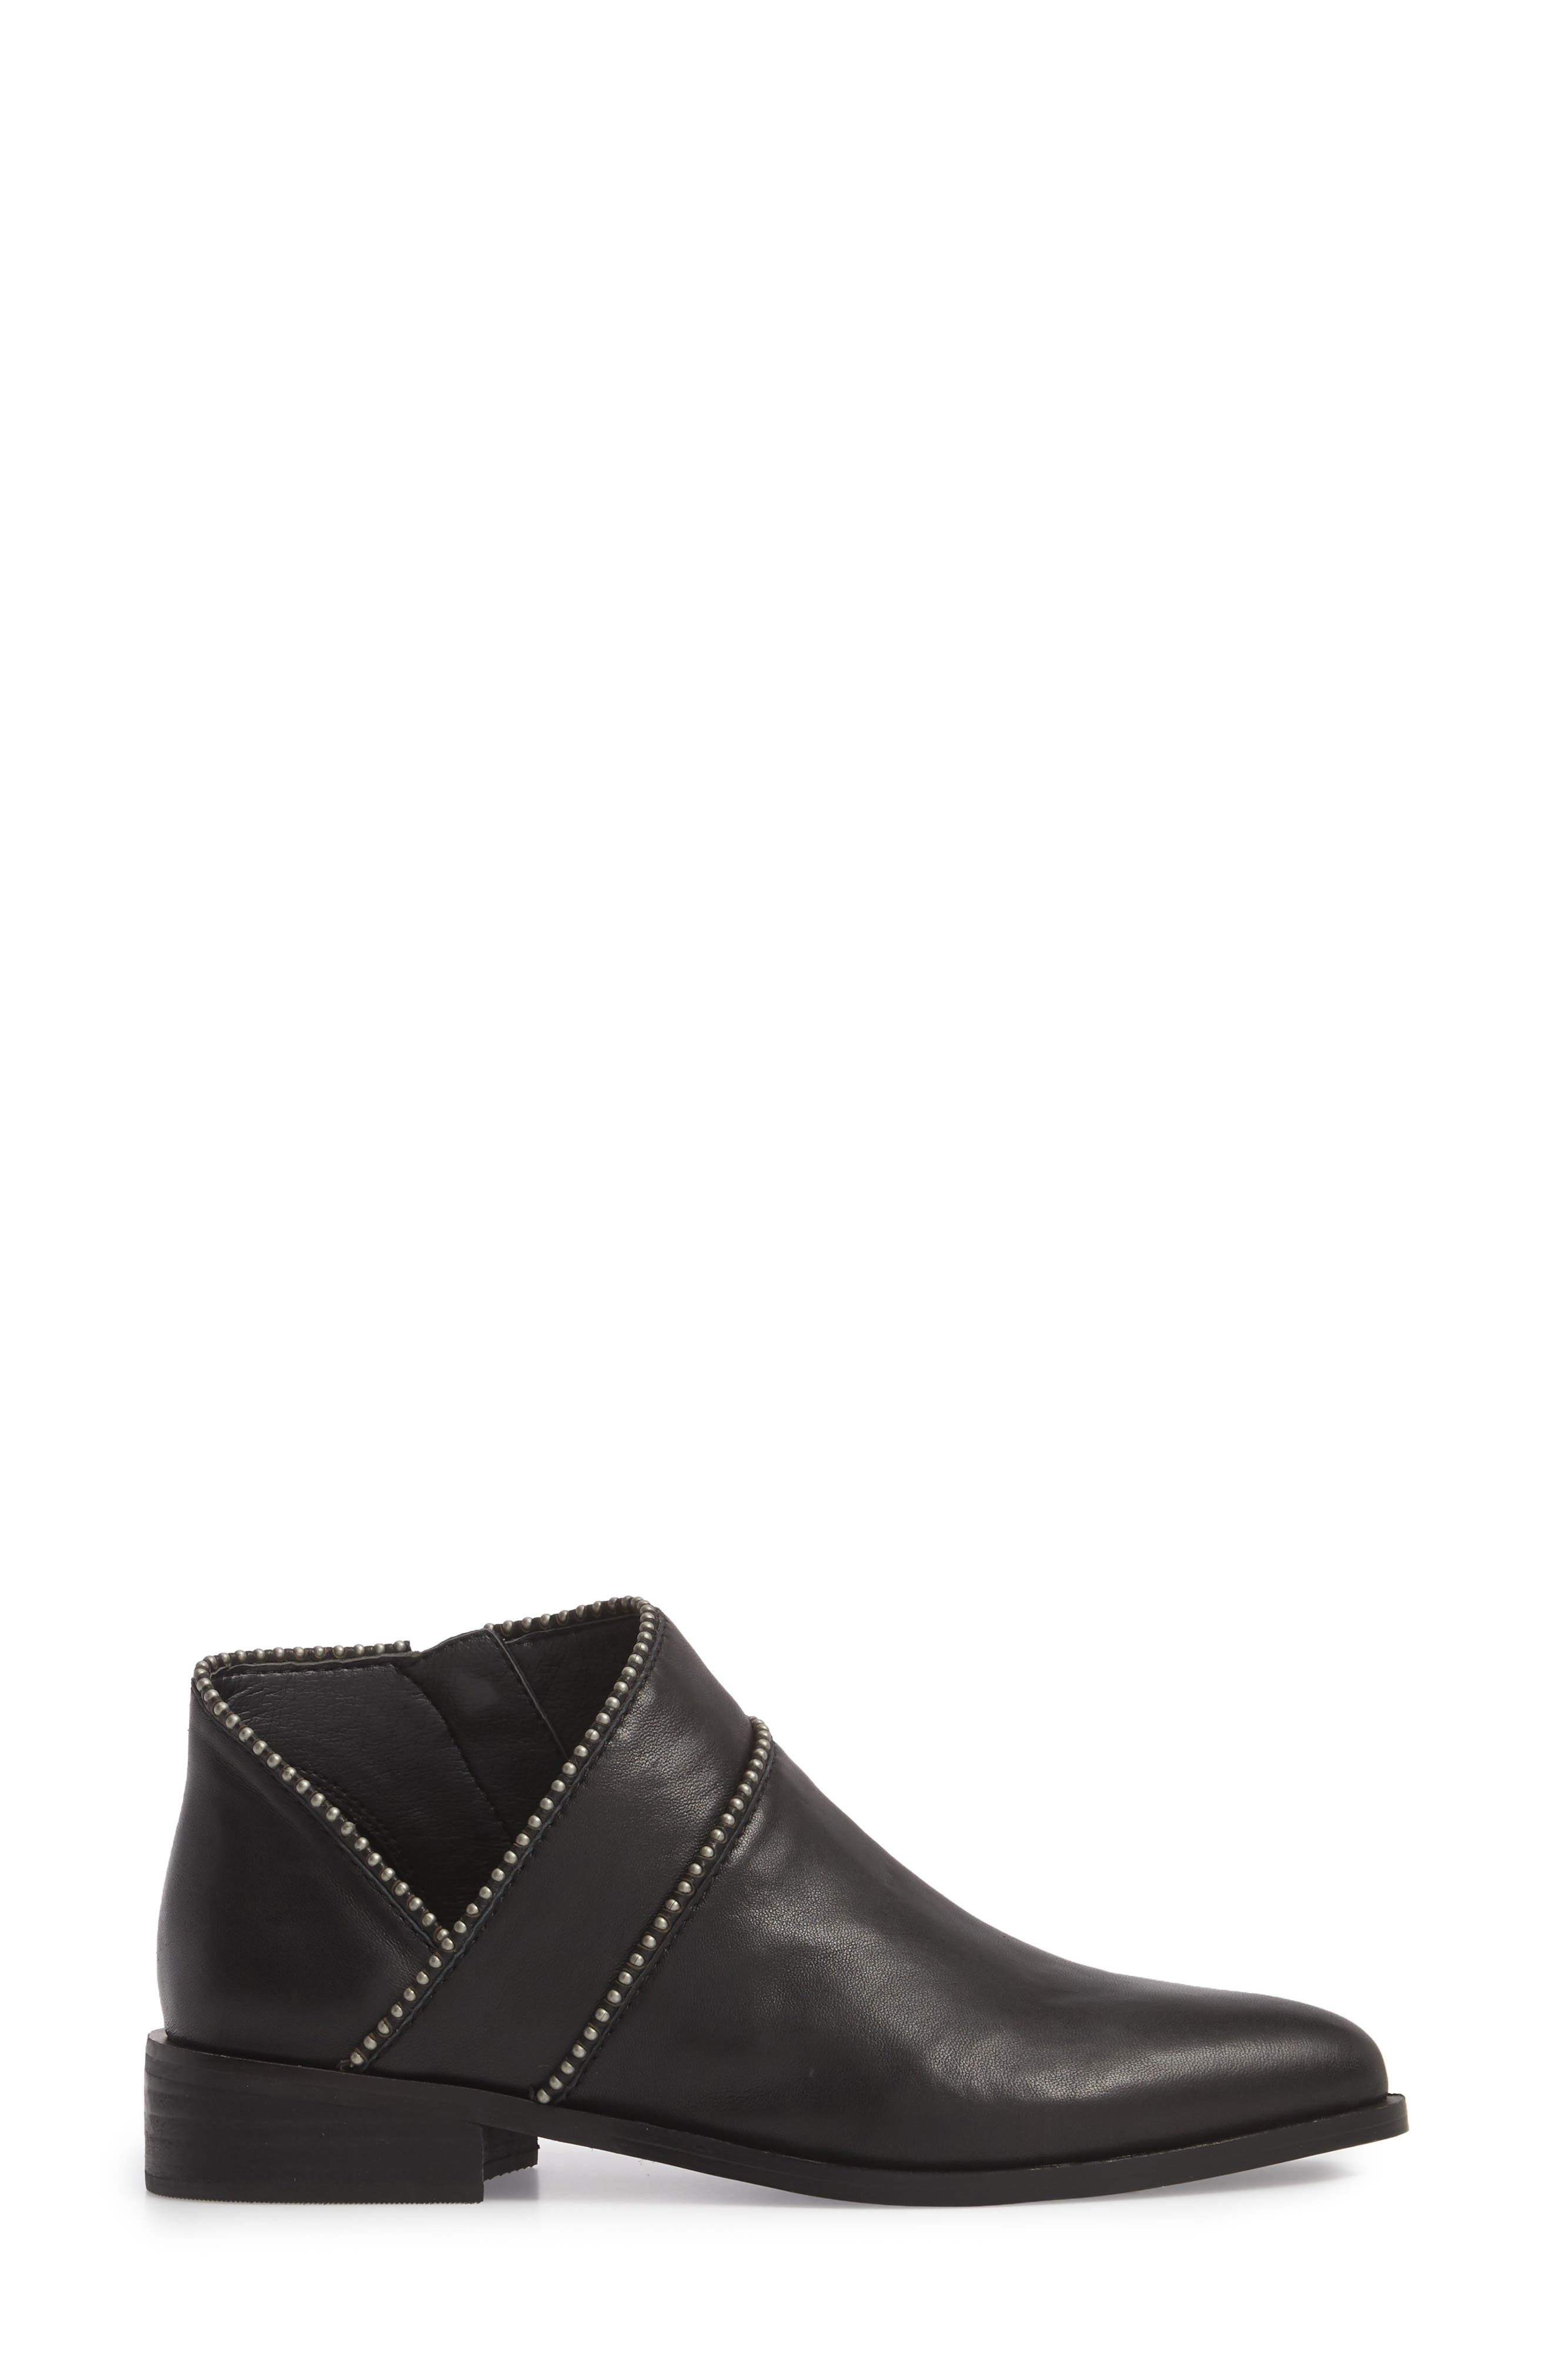 lucky brand perrma bootie